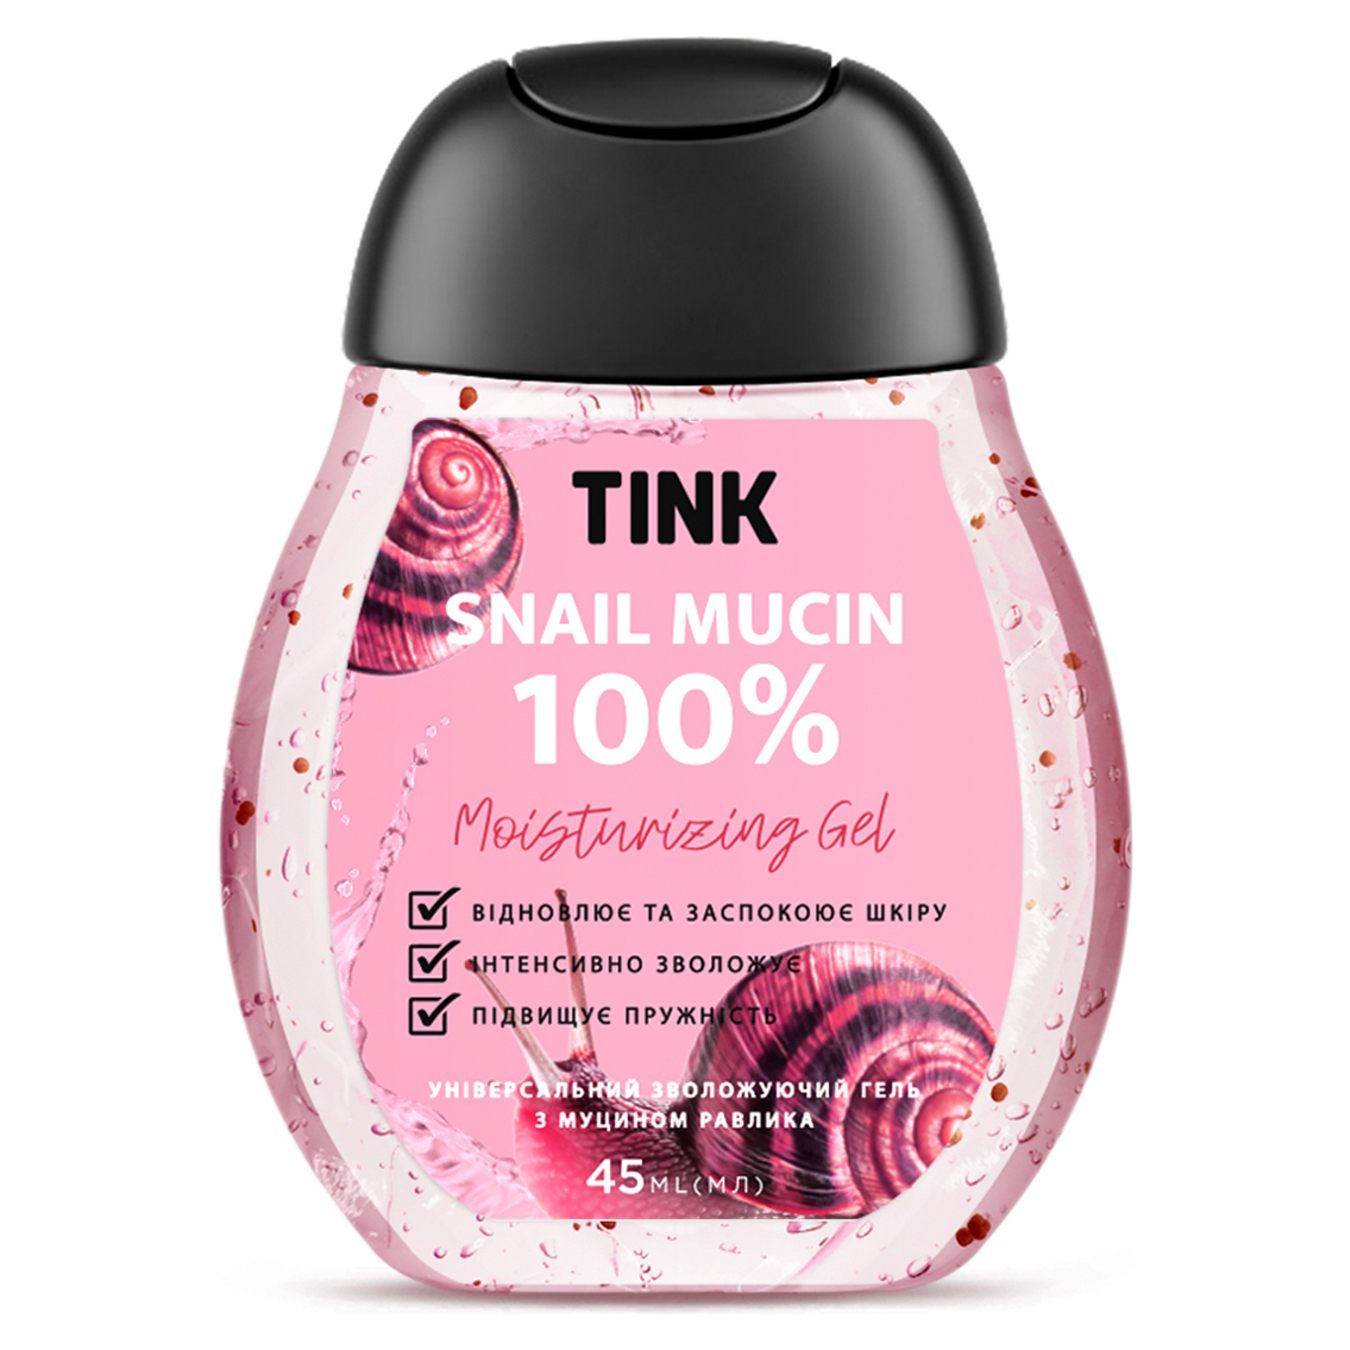 Tink gel for face and body with snail moisturizing 45ml